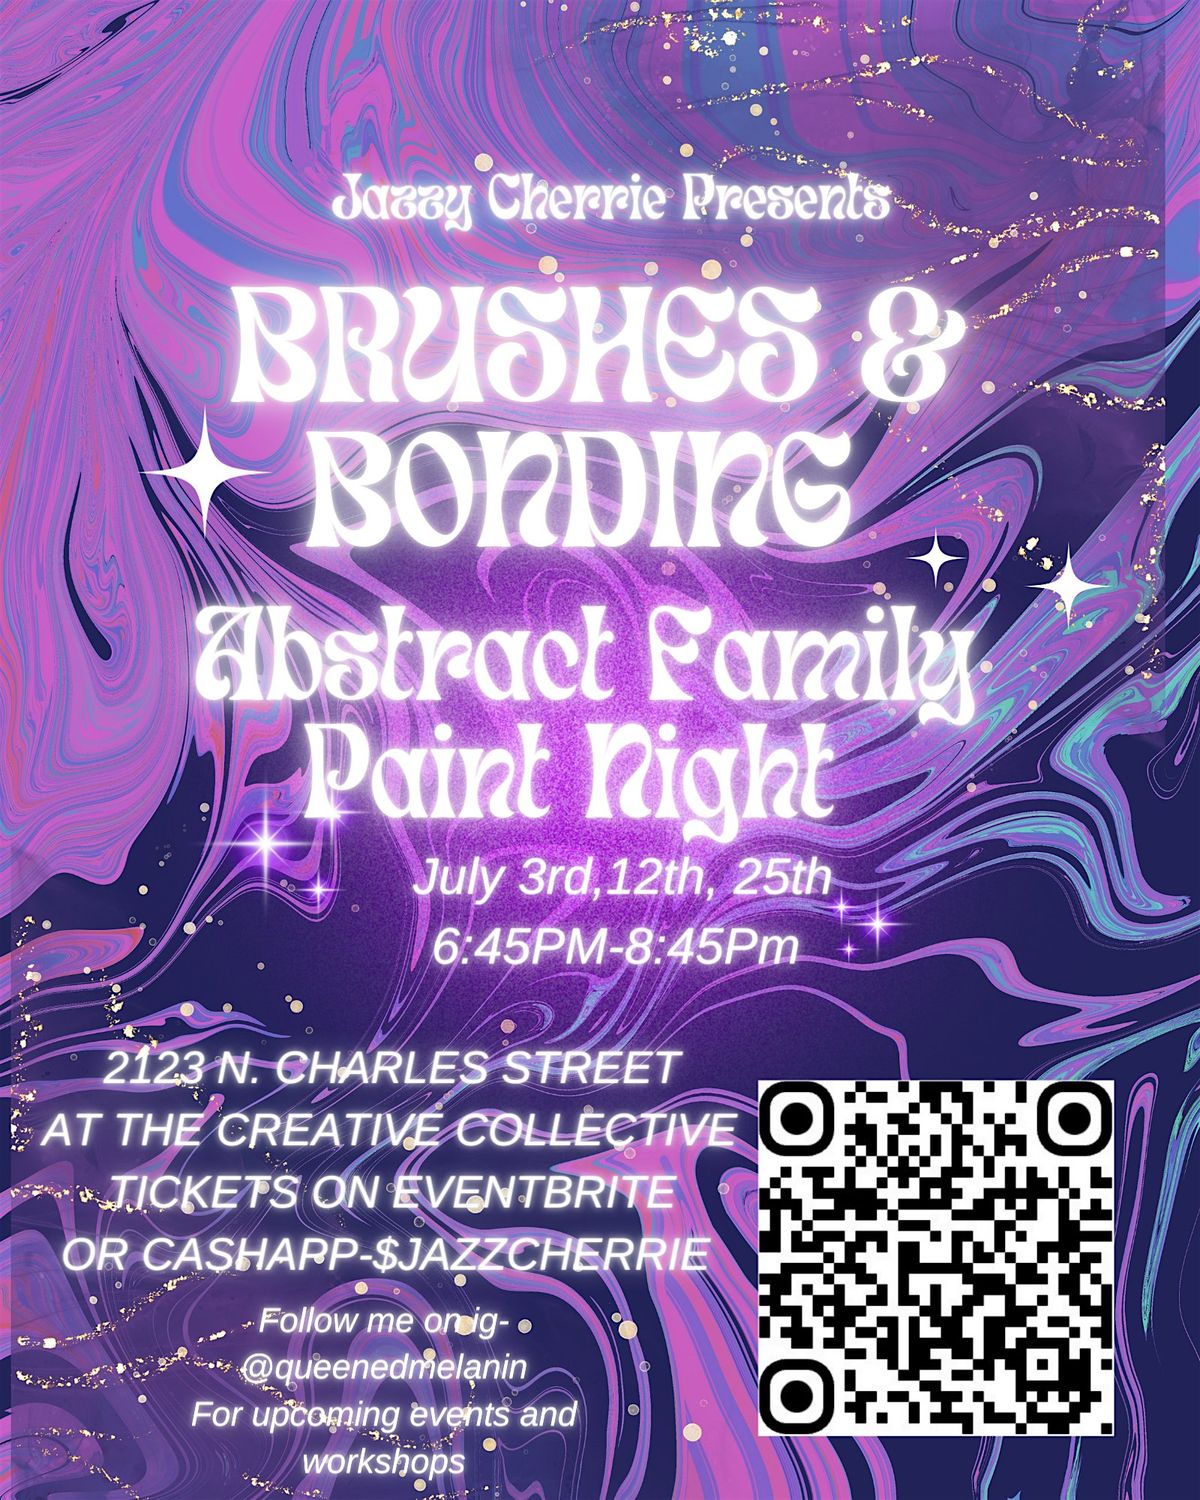 Brushes and Bonding Abstract Family Paint Night